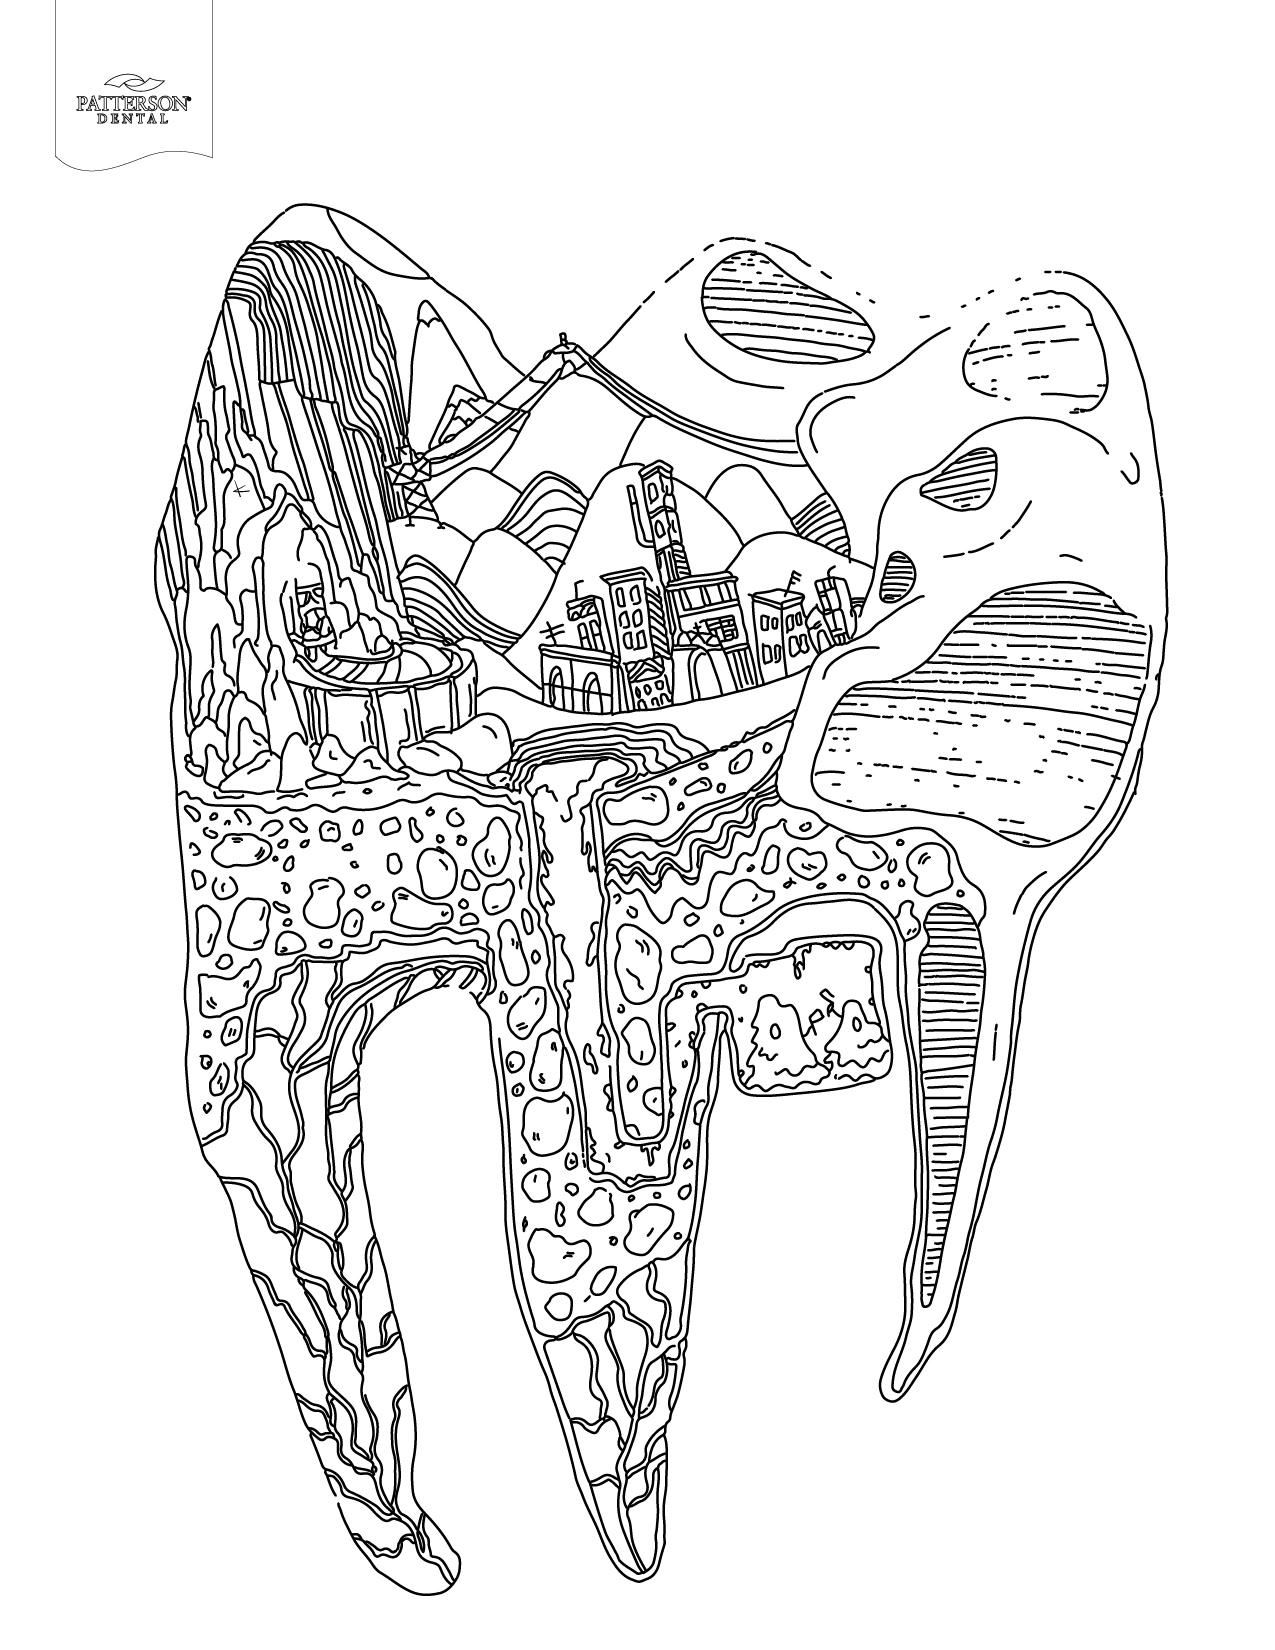 10 Toothy Adult Coloring Pages [Printable] - Off The Cusp